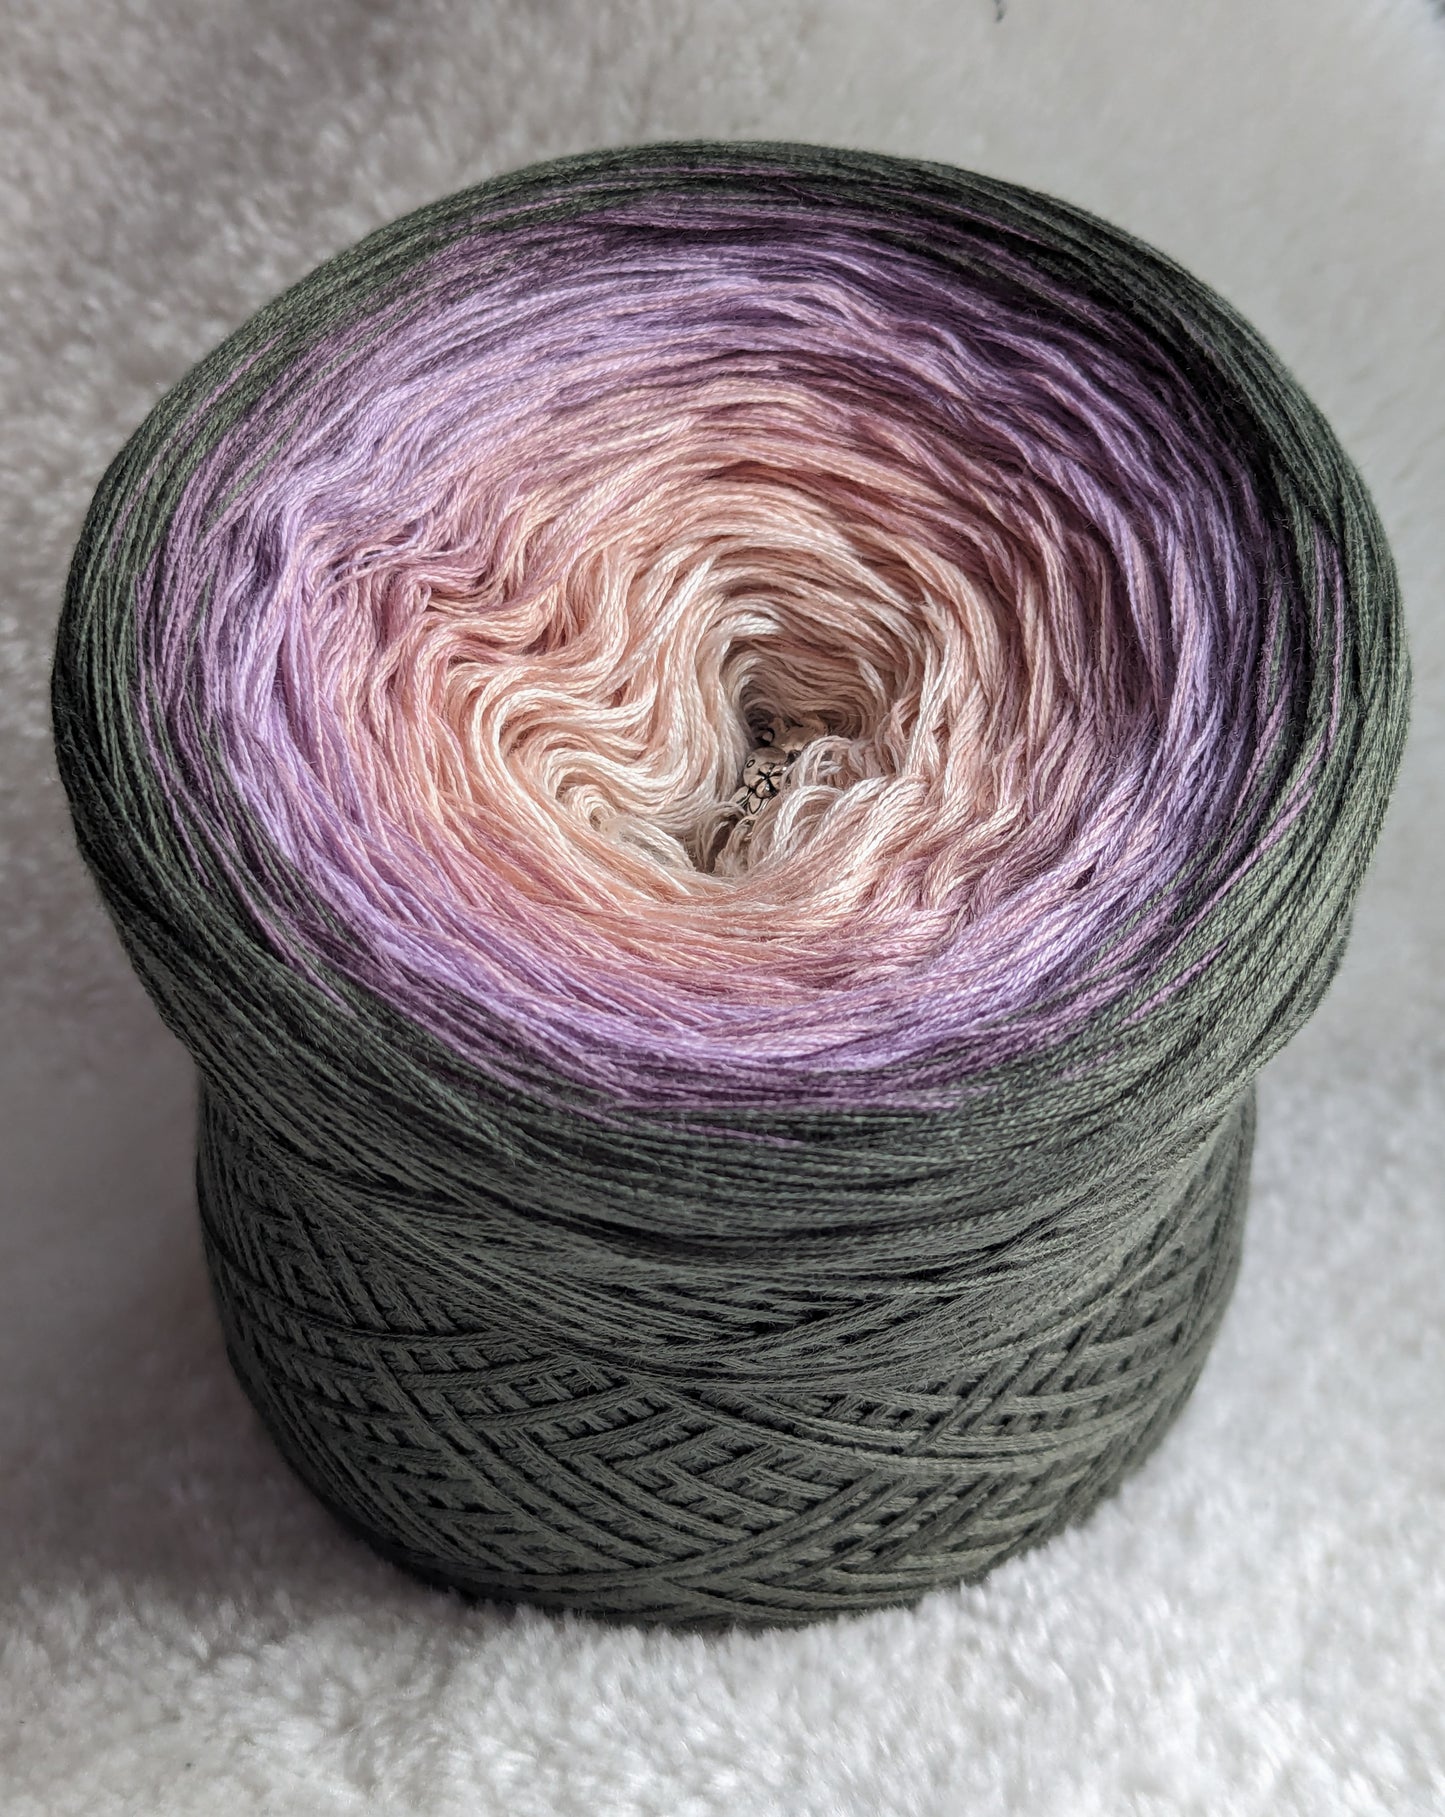 "Vintage Peonies" cotton/acrylic ombre yarn cake, 325g, about 1200m, 4ply, smoothie style